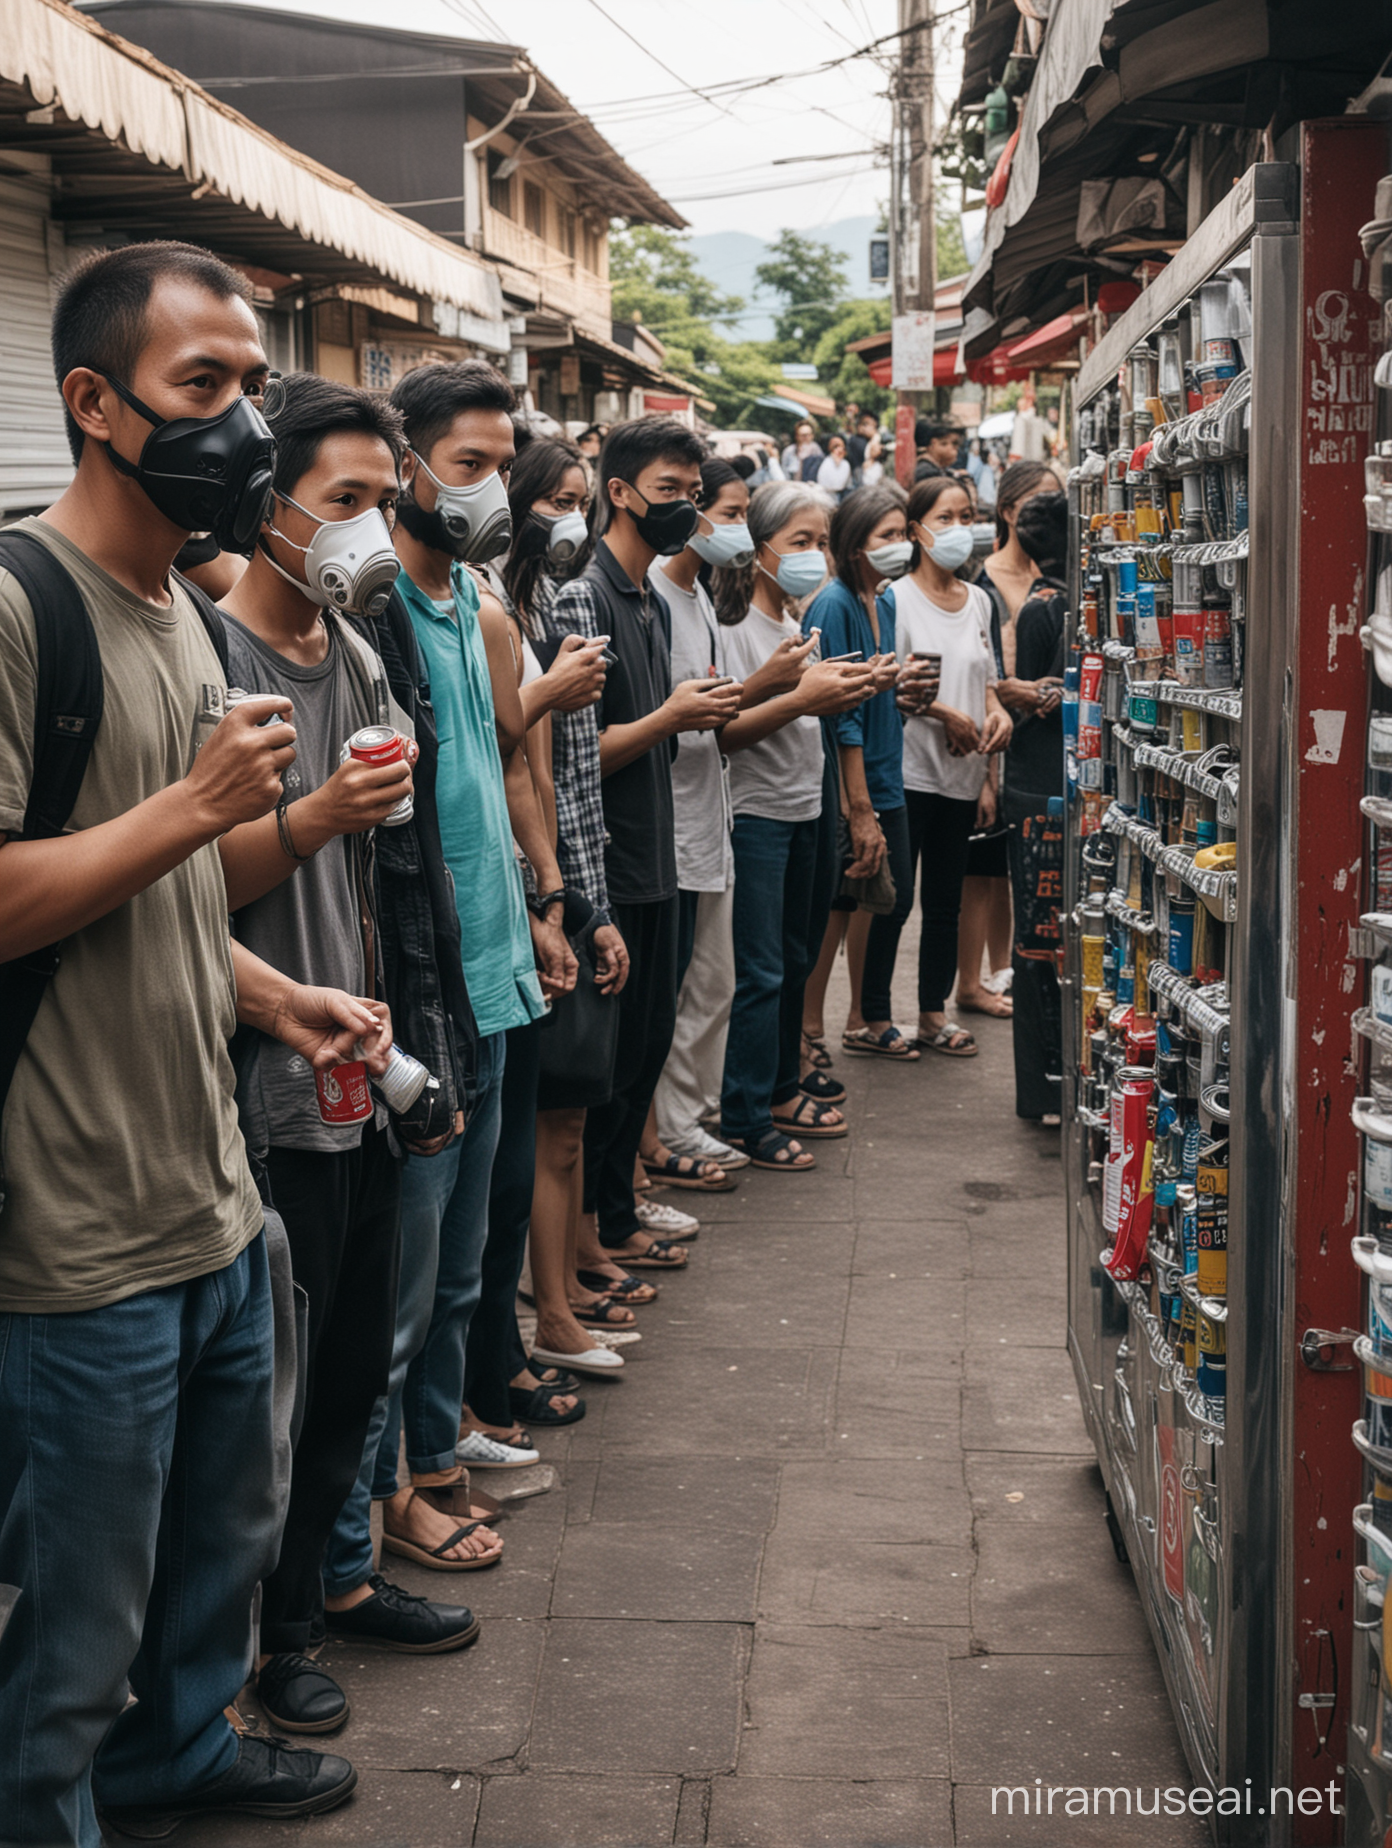 People, young and old, wearing gas masks, standing in line, buying cans of oxygen from a vending machine, in Chiang Mai, Thailand,